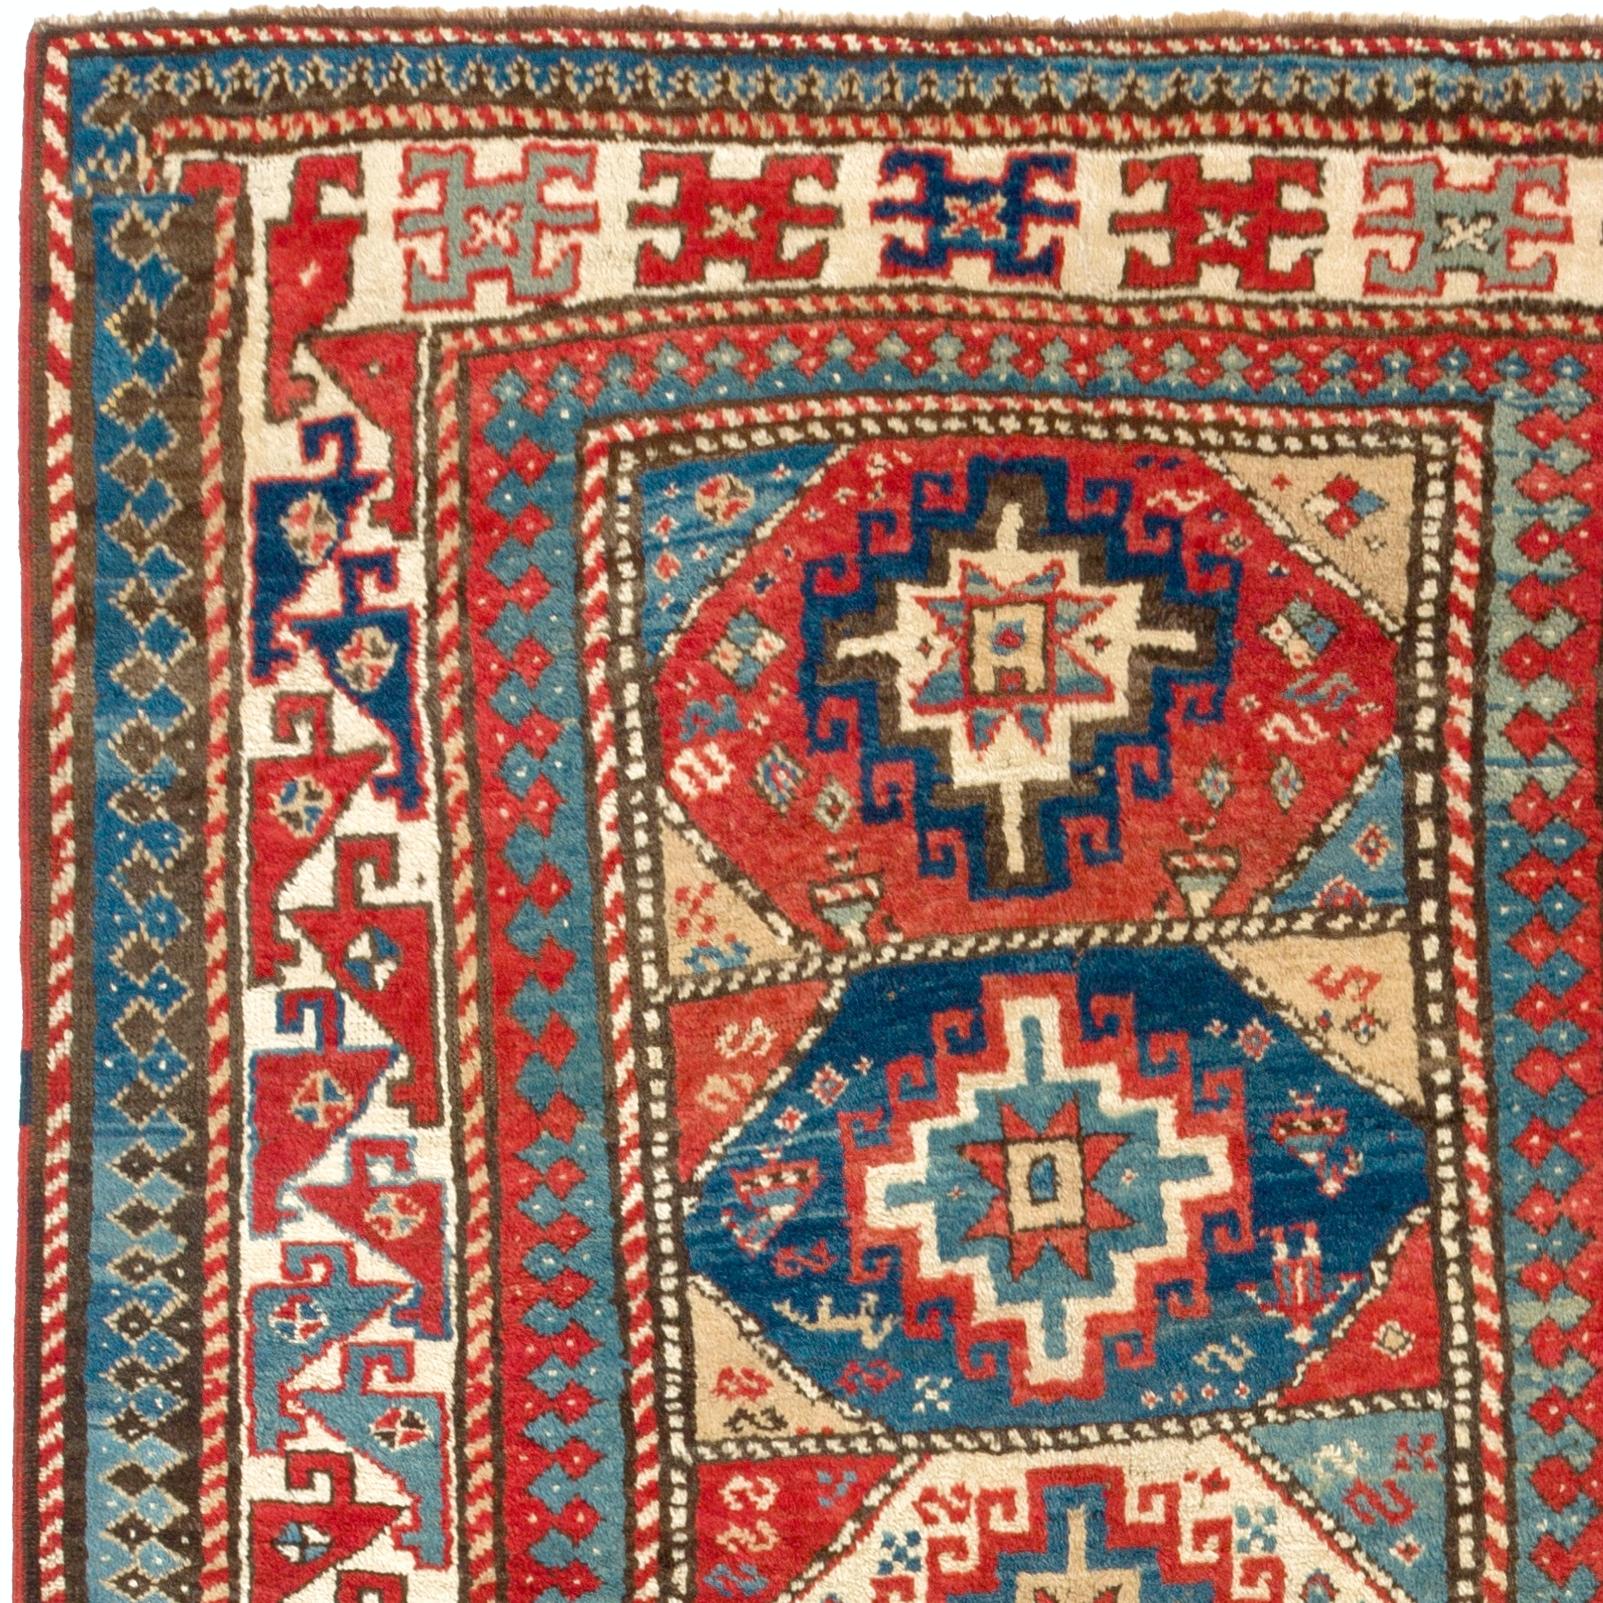 A colorful Caucasian Kazak rug made of natural dyed lambs wool pile on wool foundation, circa 1870.
Good condition and even medium pile. Measures: 4 x 8 ft.